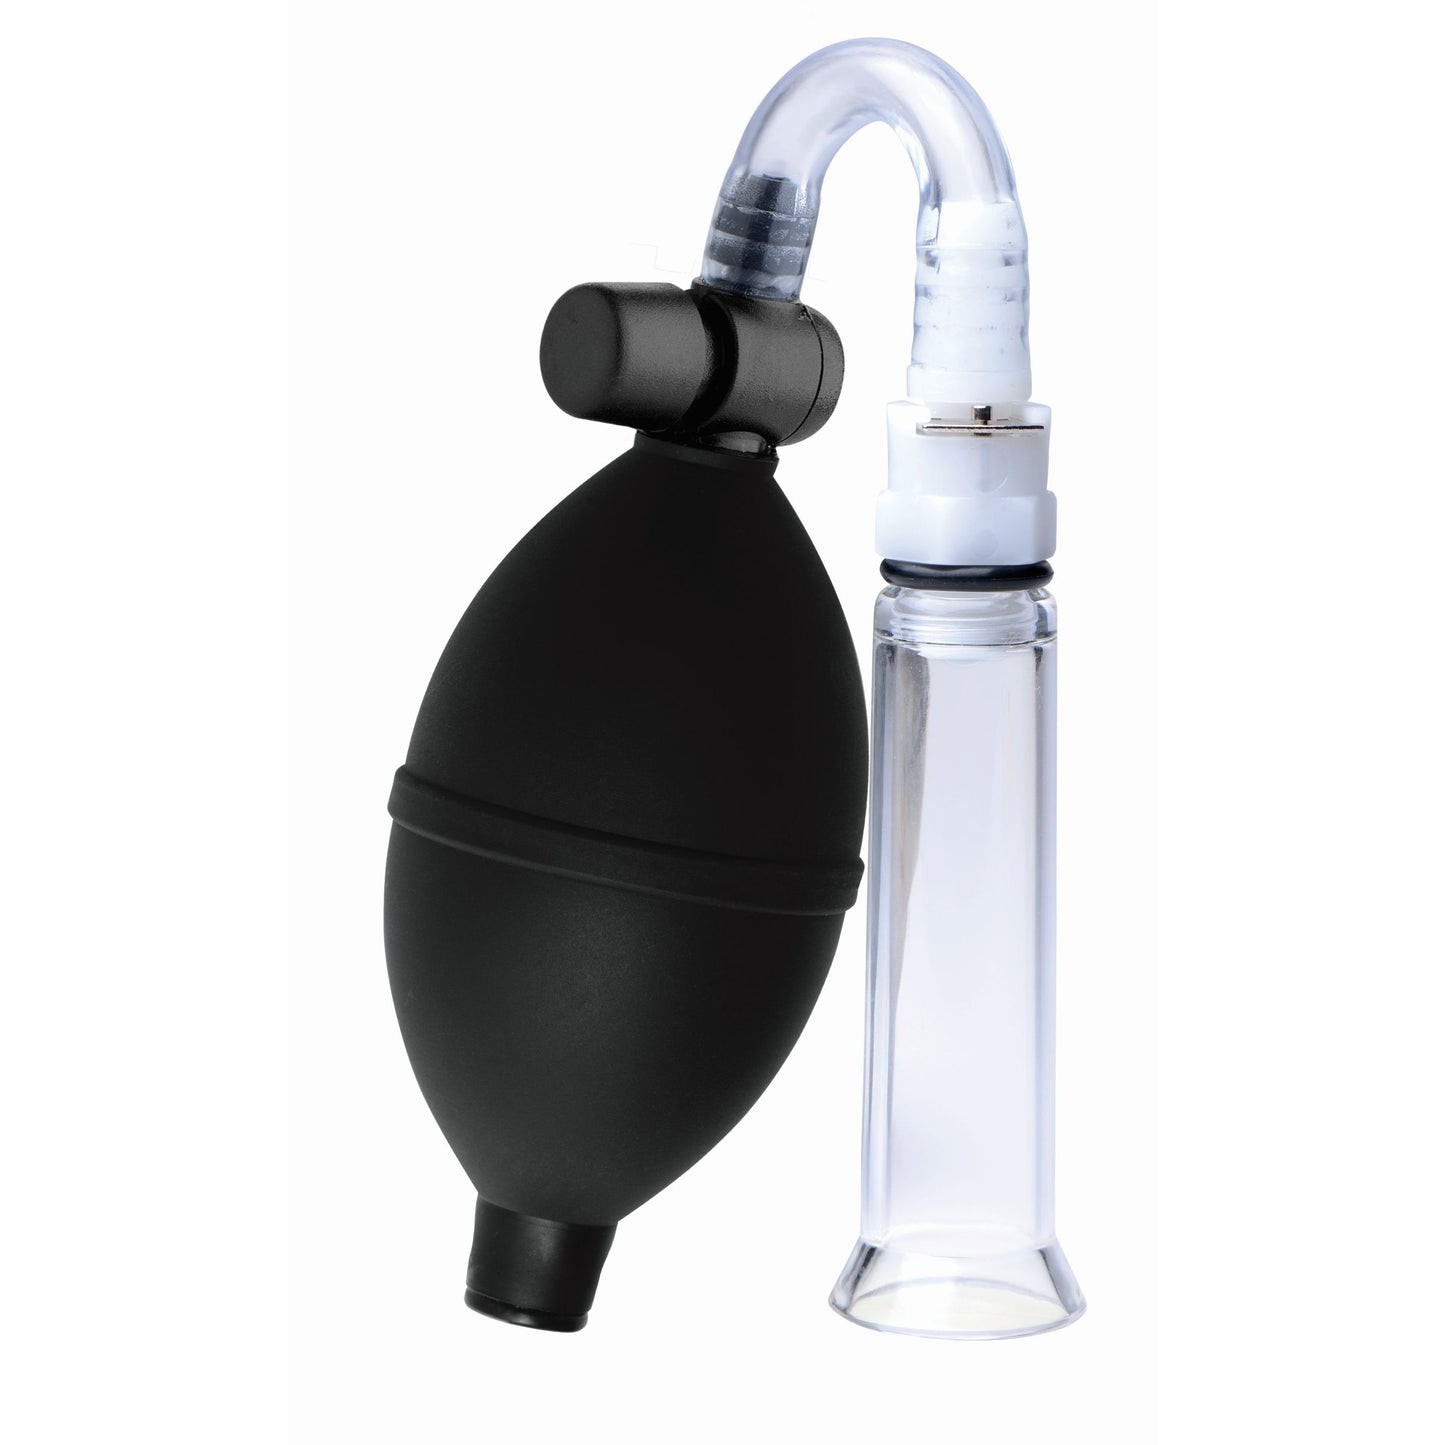 Clitoral Pumping System with Detachable Acrylic Cylinder - UABDSM